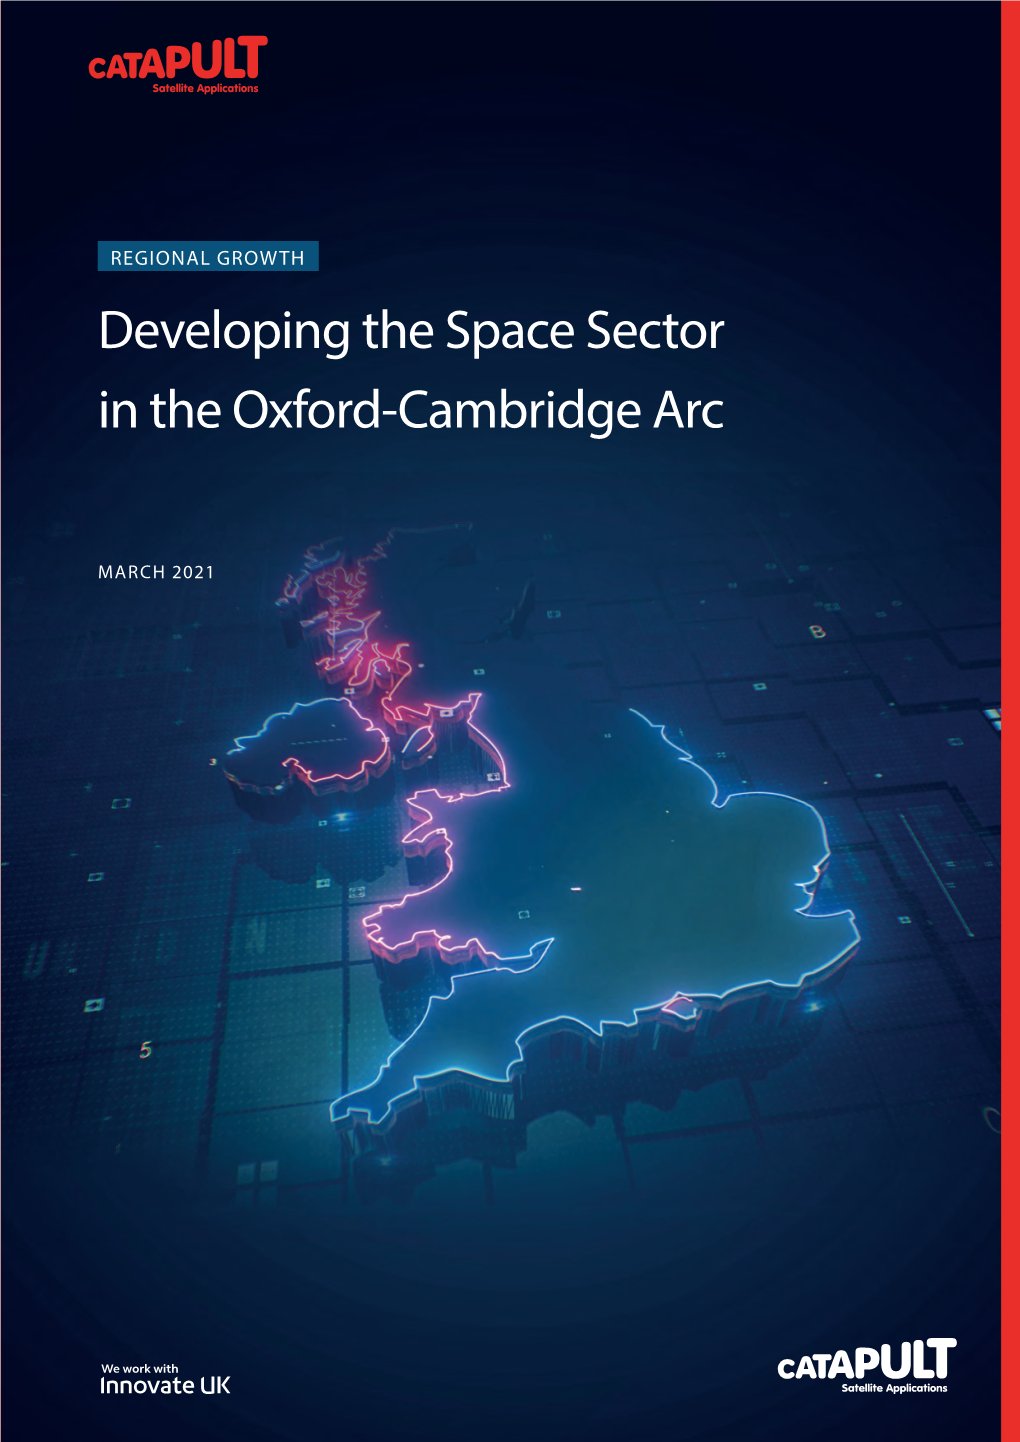 Developing the Space Sector in the Oxford-Cambridge Arc